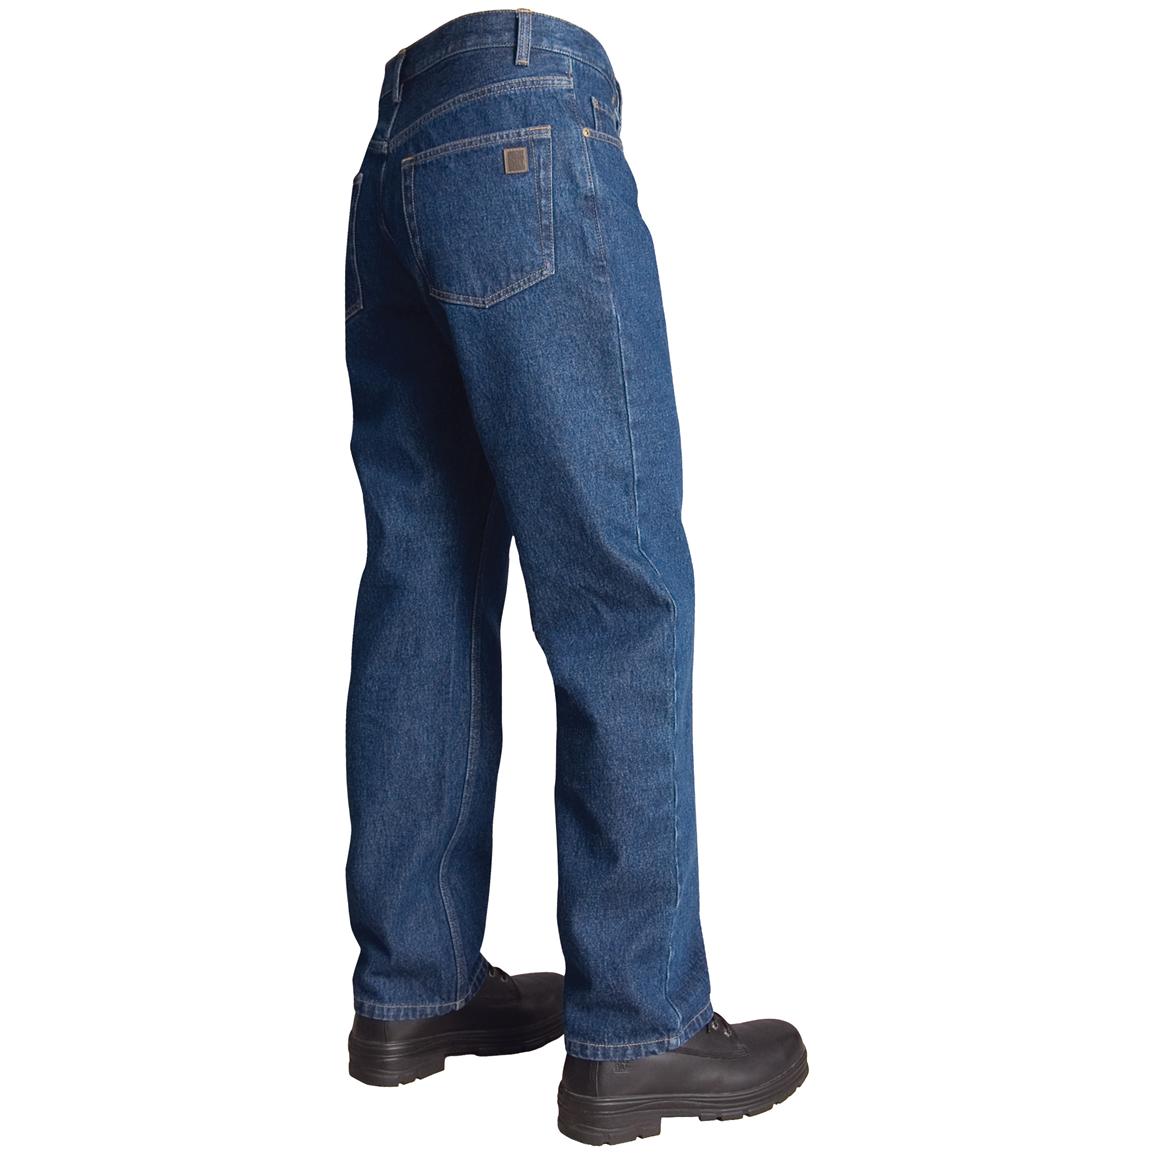 Big Bill® Classic Fit Jeans - 226848, Jeans & Pants at Sportsman's Guide